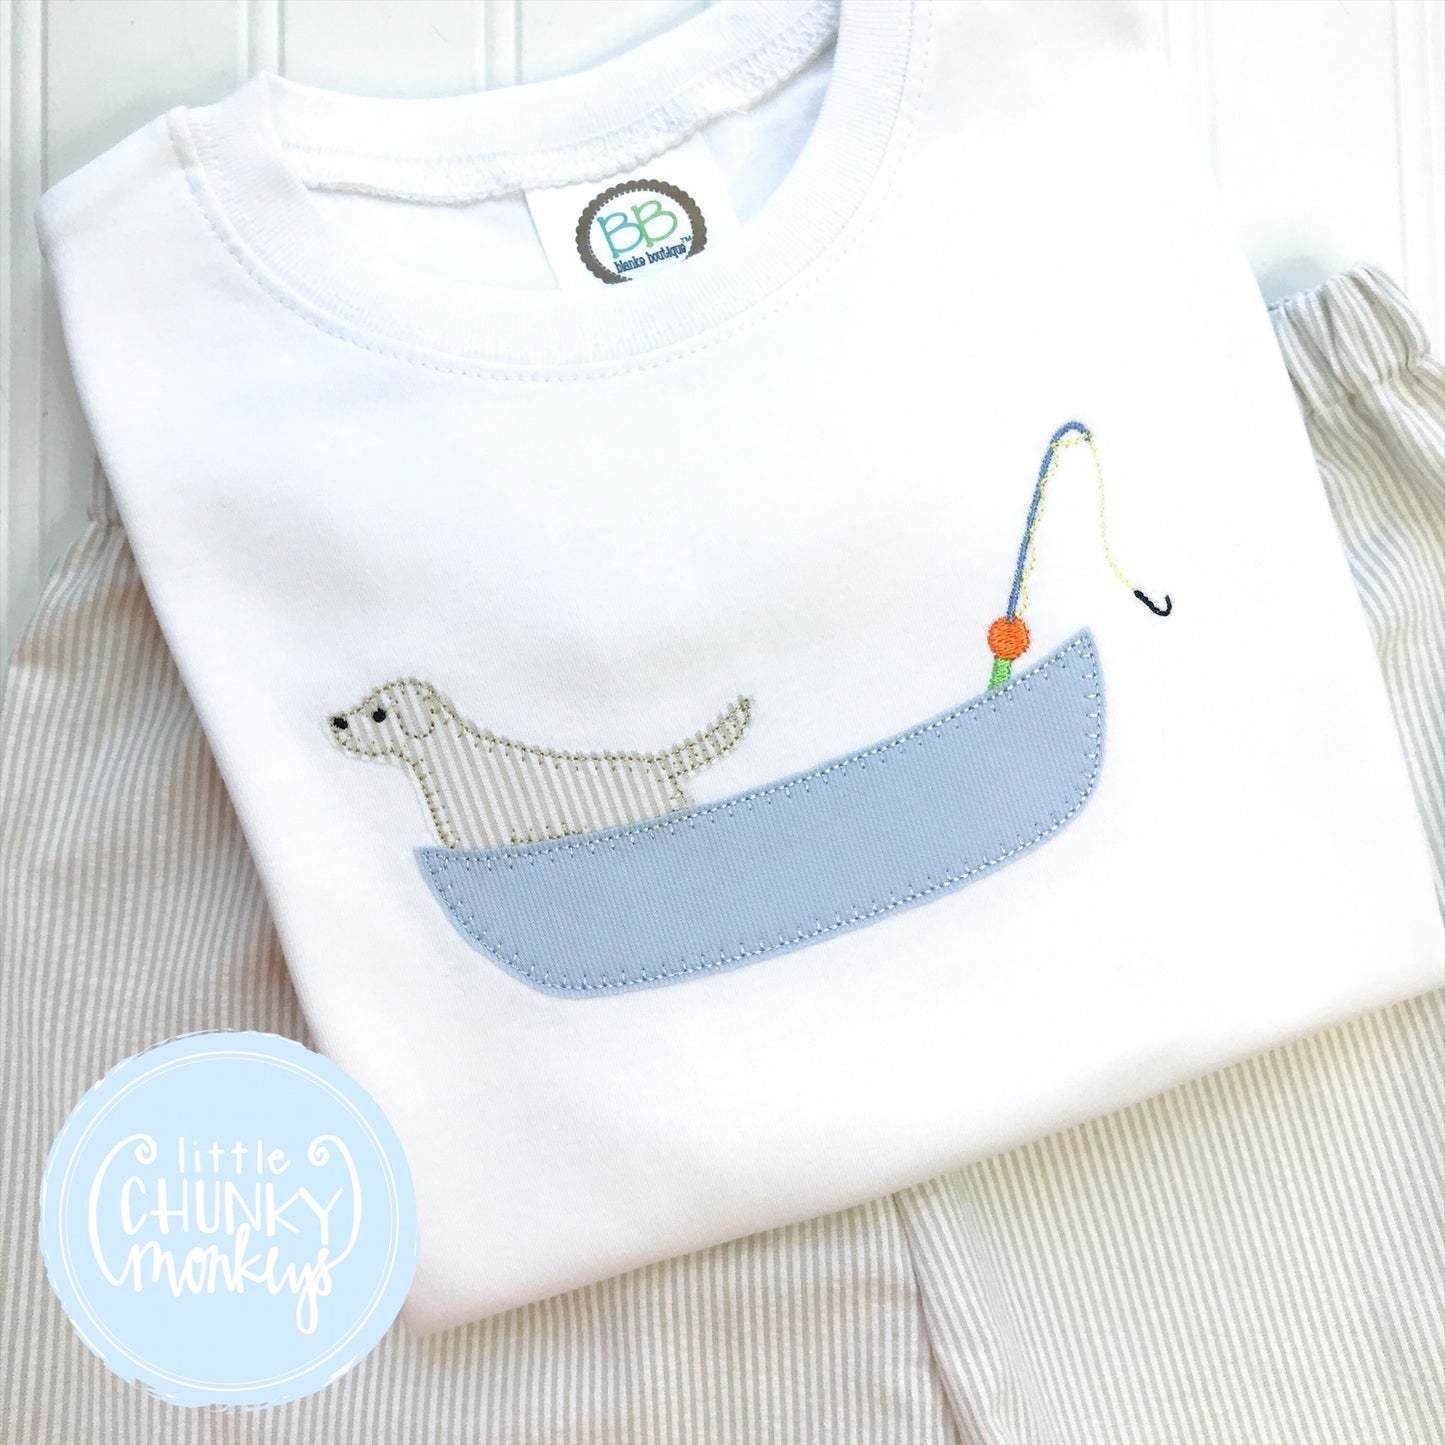 Boy Shirt - Applique Fishing Boat with Dog